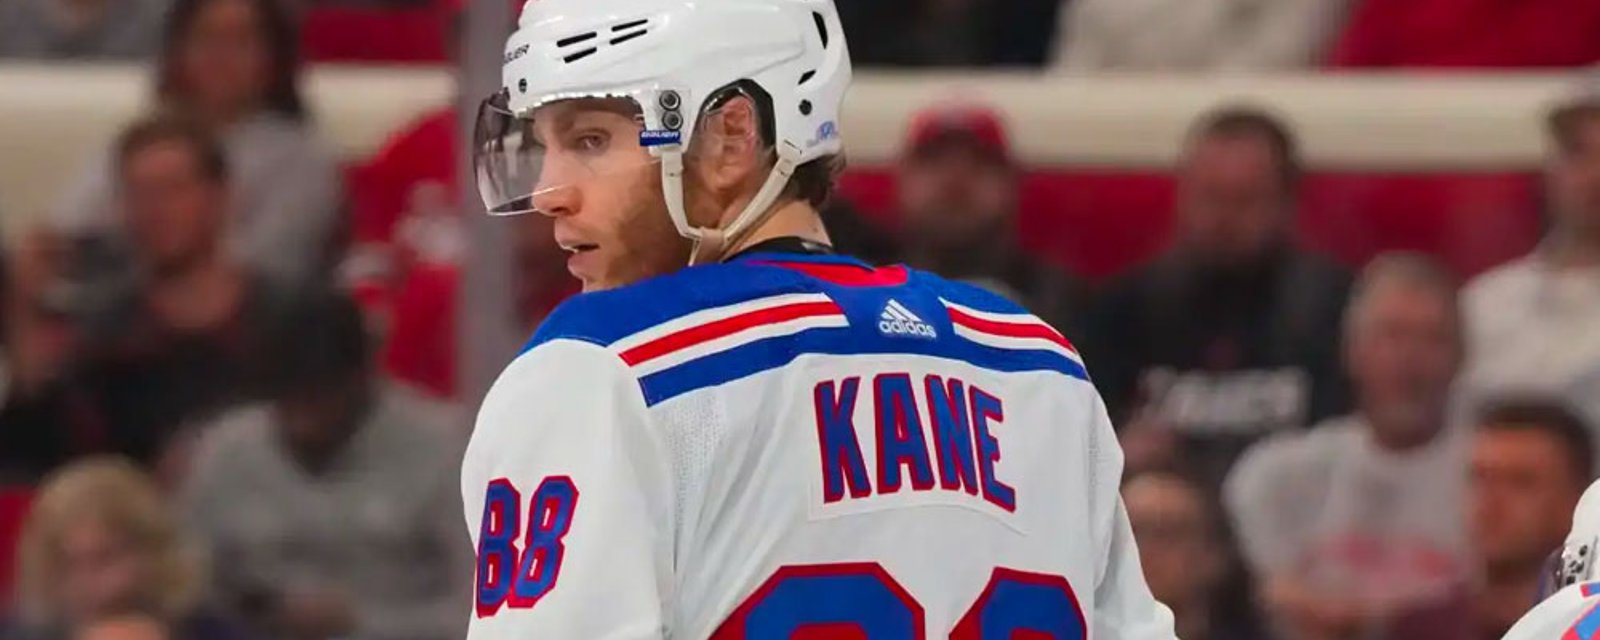 Patrick Kane finally signs with a new team!